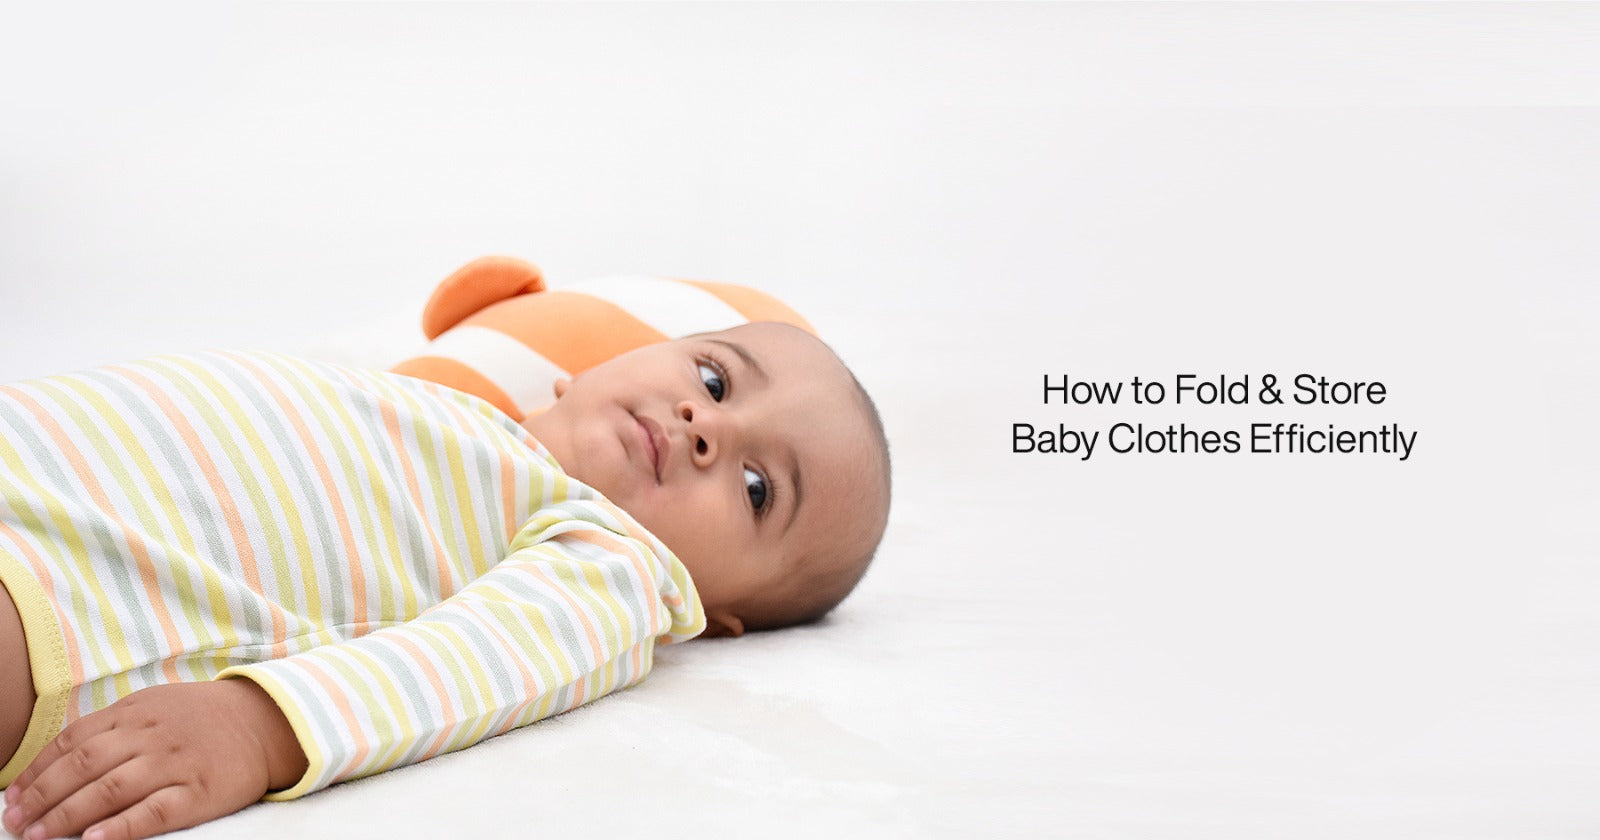 How to Fold & Store Baby Clothes Efficiently